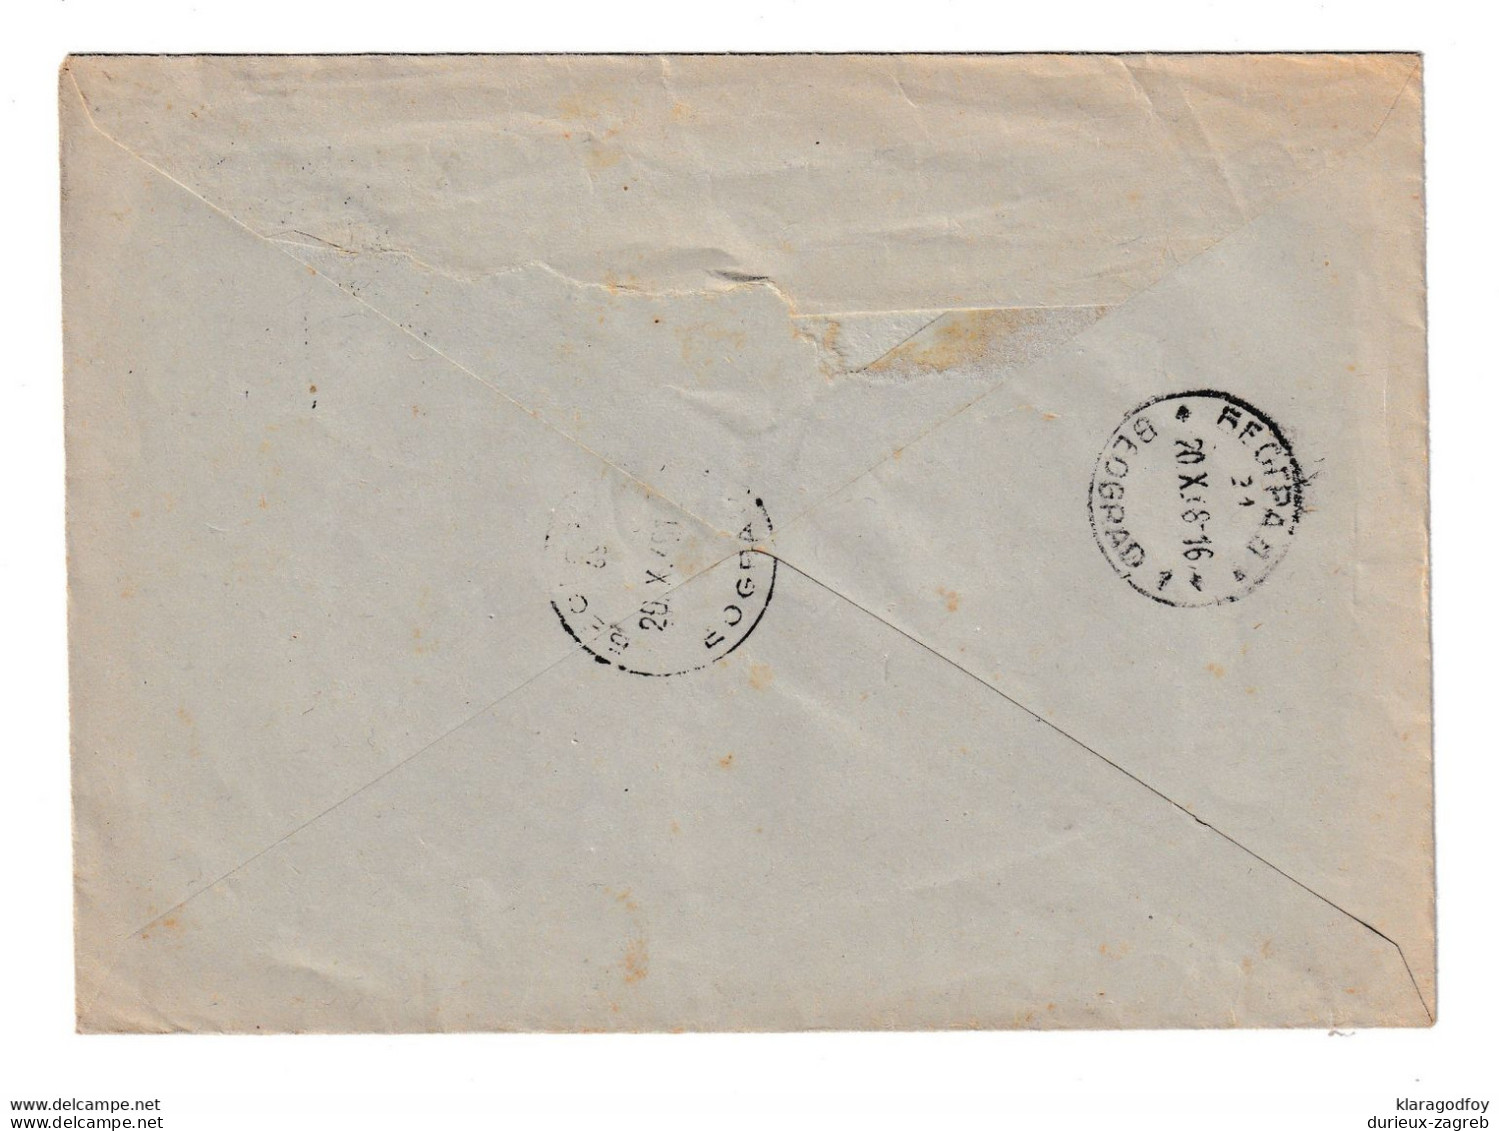 Yugoslavia Official Letter Cover Posted Registered 1948 Rudnici Uglja Litva To Beograd B210112 - Covers & Documents